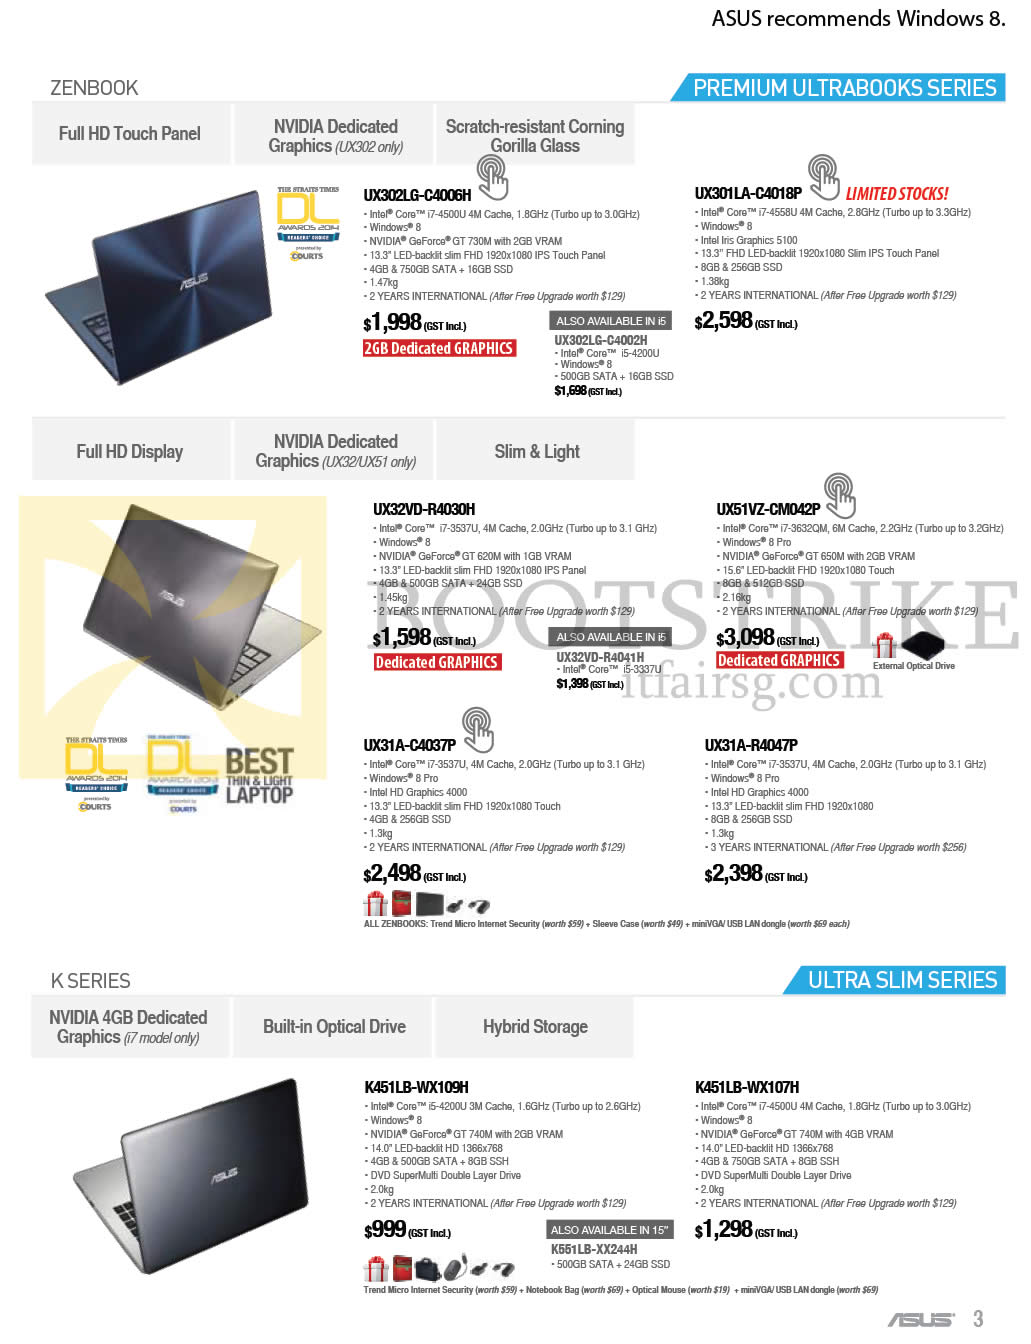 IT SHOW 2014 price list image brochure of ASUS Notebooks Zenbook UX302LG-C4006H, UX301LA-C4018P, UX32VD-R4030H, UX51vZ-CM042P, UX31A-C4037P, UX31A-R4047P, K451LB-WX109H, K451LB-WX107H